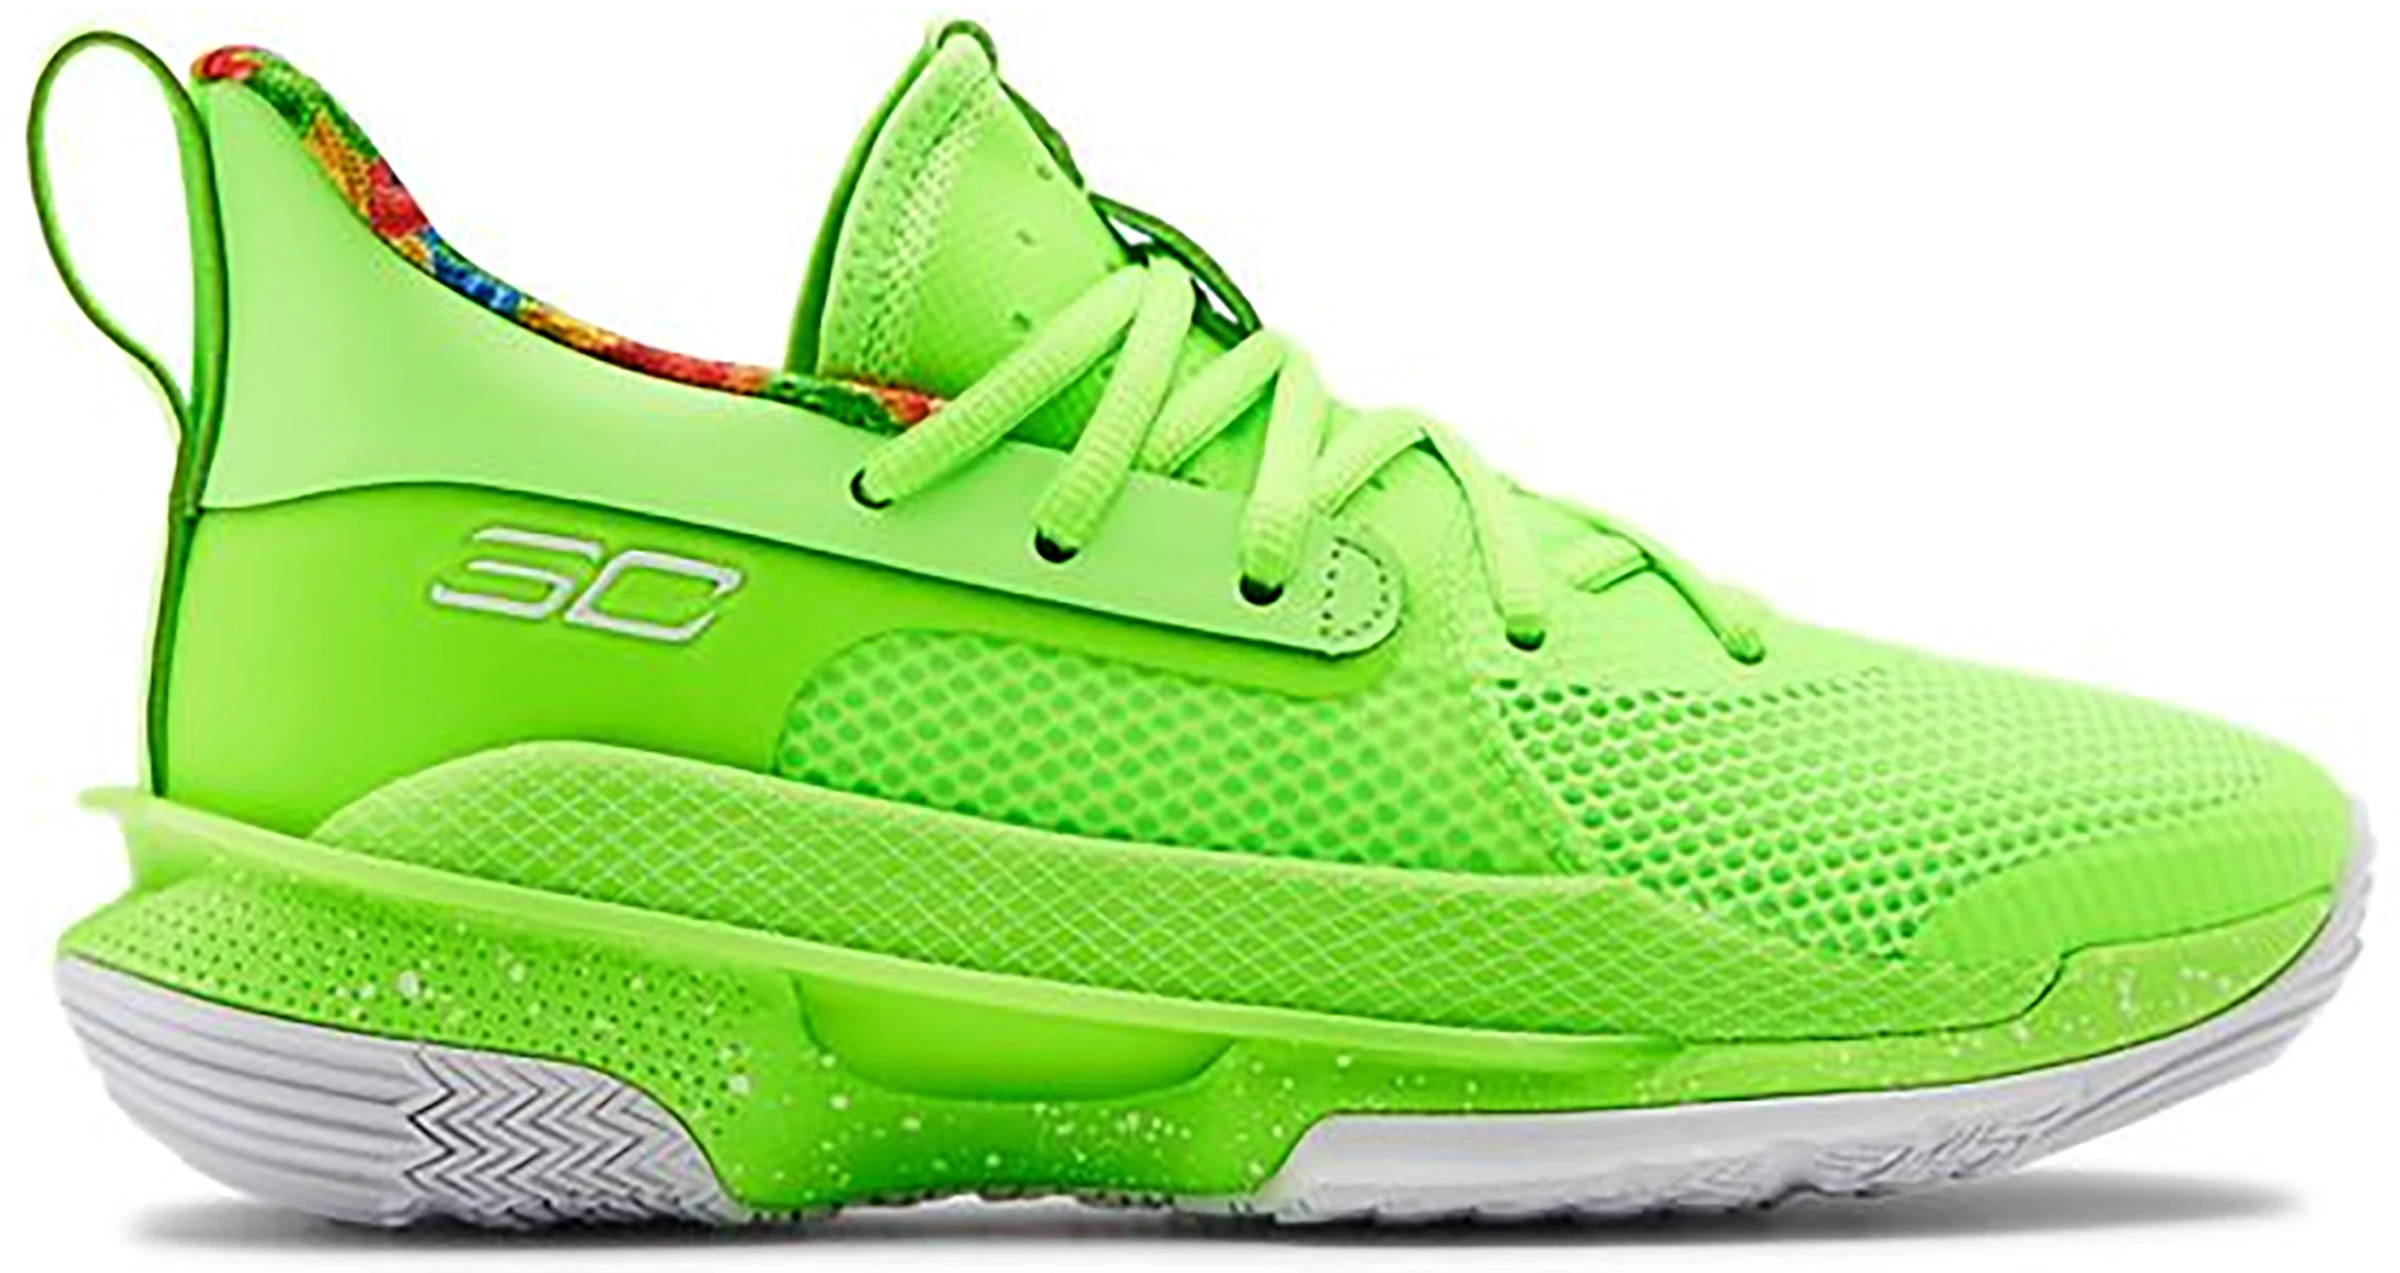 Under Armour Curry 7 Sour Patch Kids Lime (GS) - 3022113-302 -